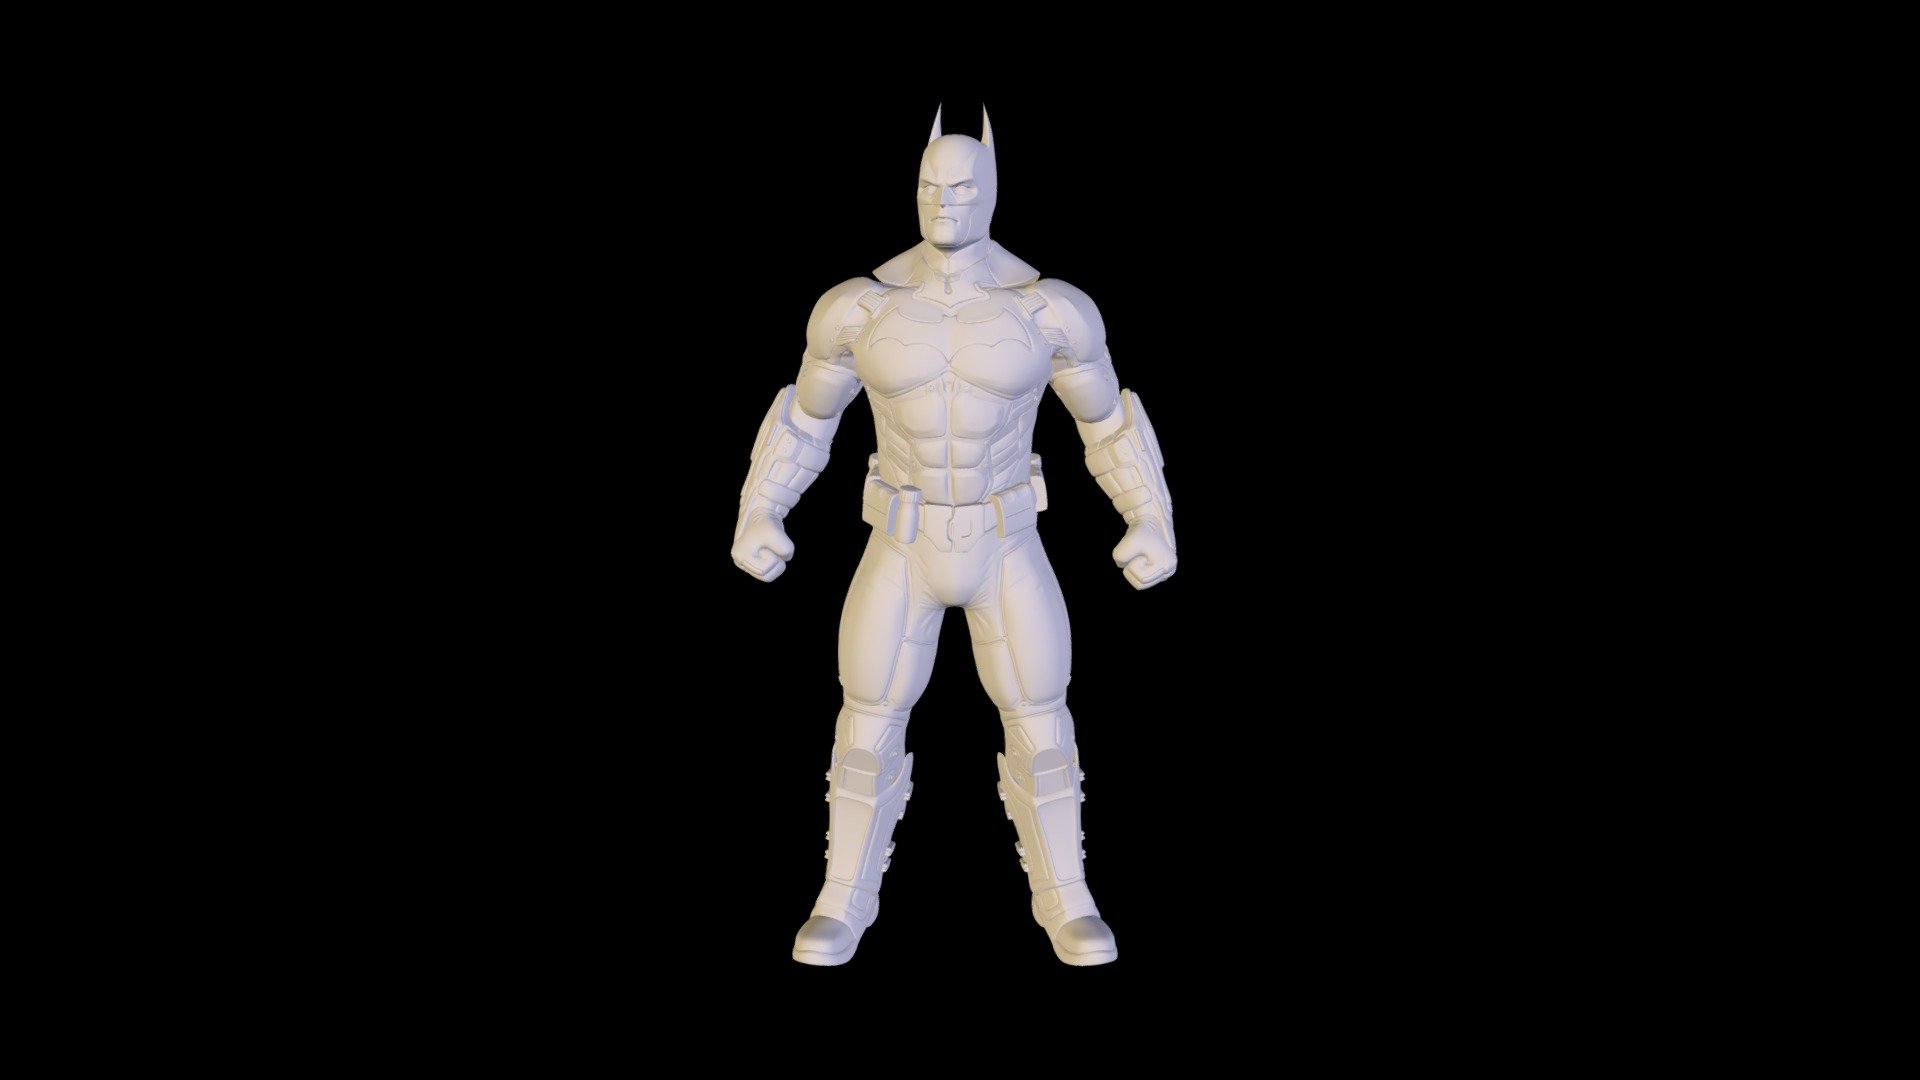 Batman Arkham Origins for 3d printing - Download Free 3D model by abaiao  (@abaiao) [c568a19]